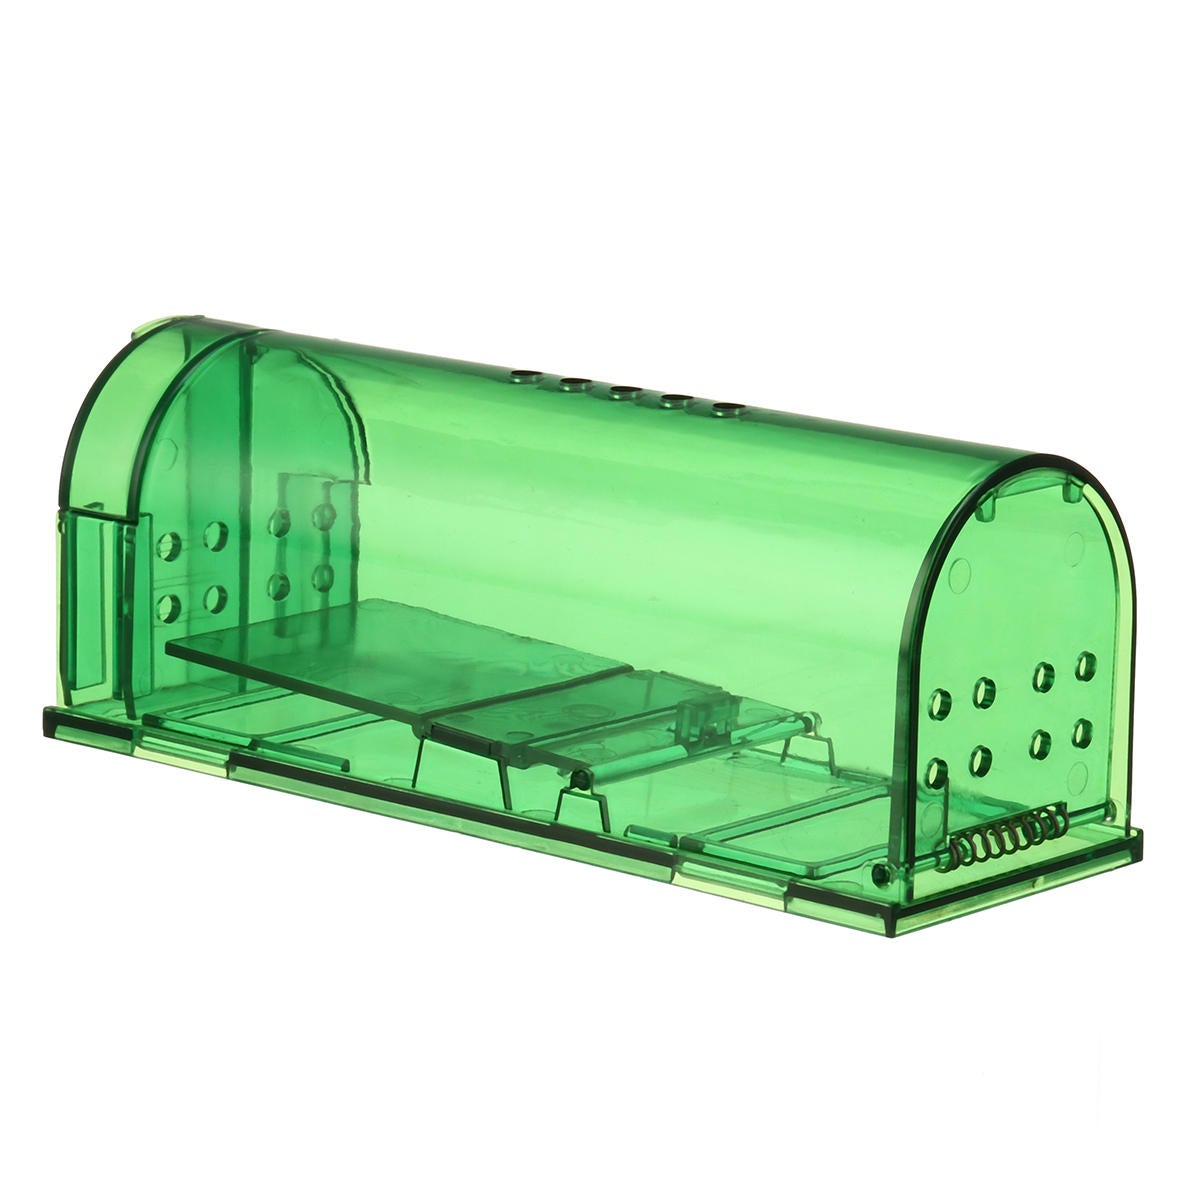 Rat Catcher Cage Home Live Trap Pest Humane Large Live Rodent Indoor Outdoor Mousetrap